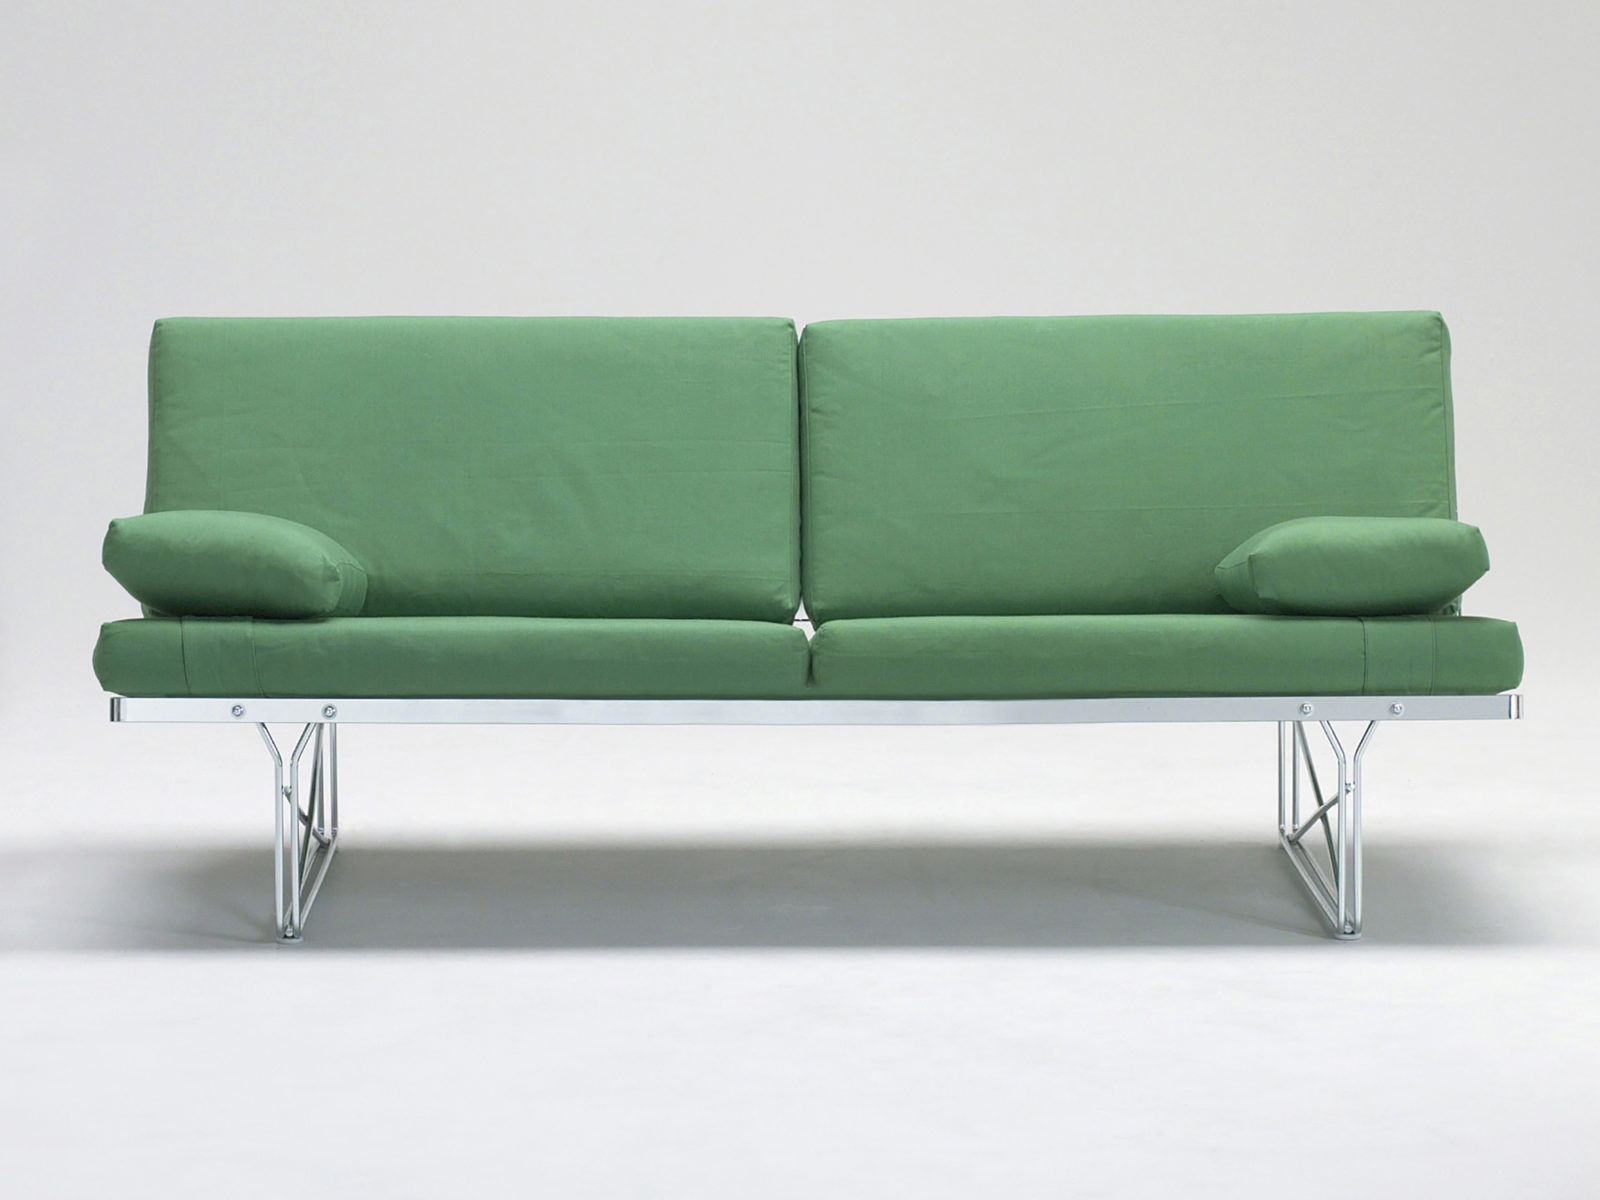 Sofa made from metal wire frame, and green upholstery.